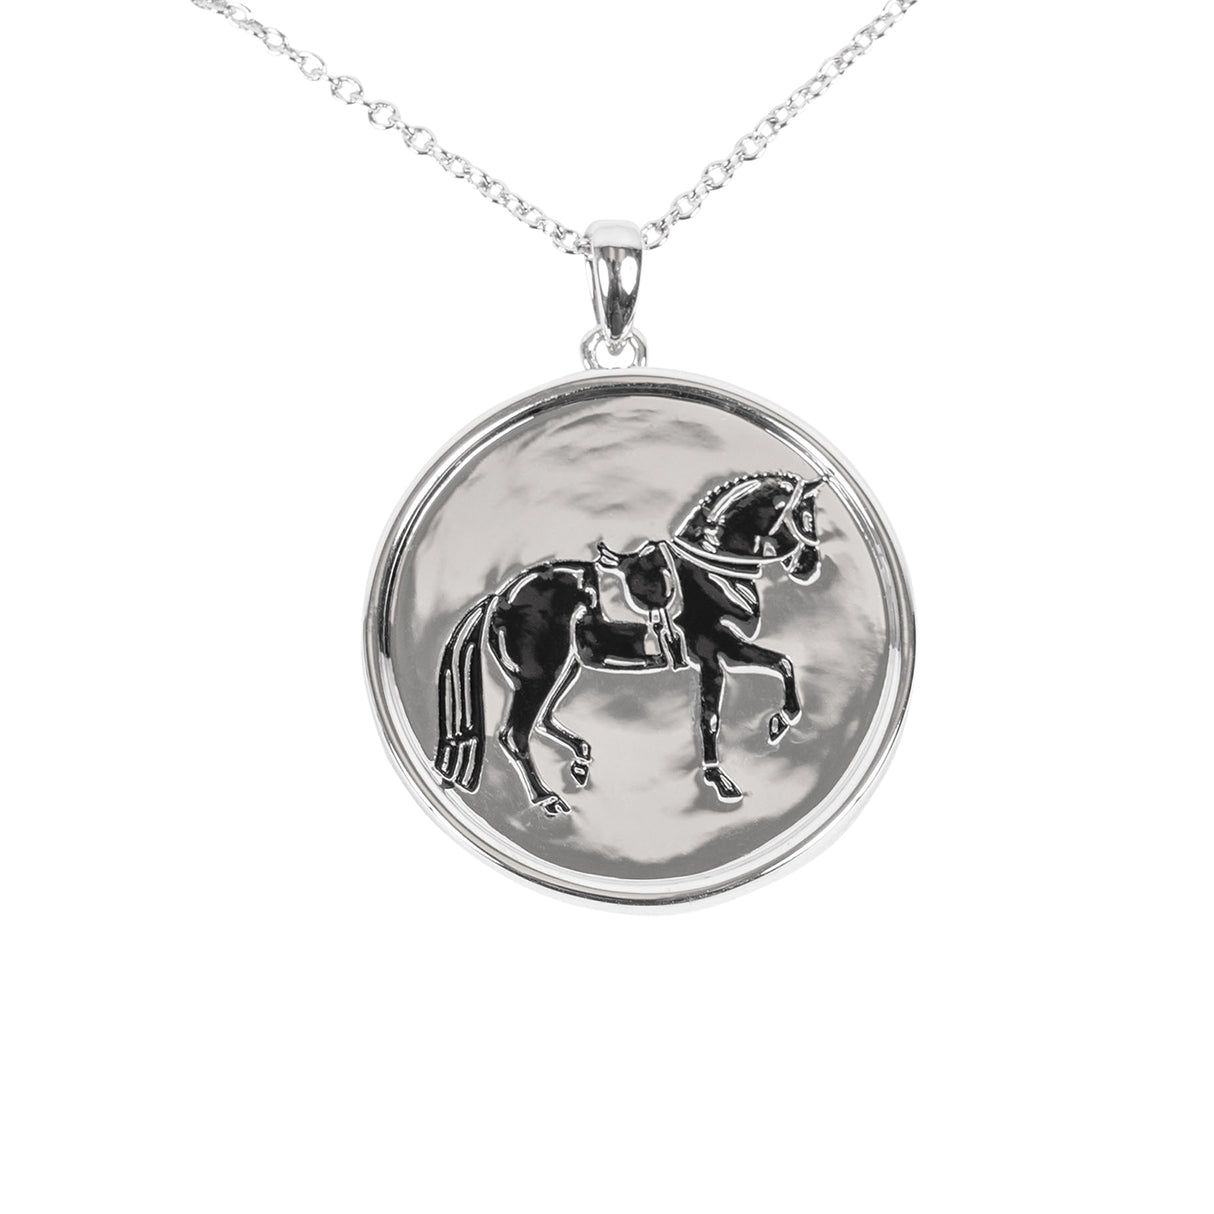 Cinto by Kelly Herd Black Dressage Medallion Necklace